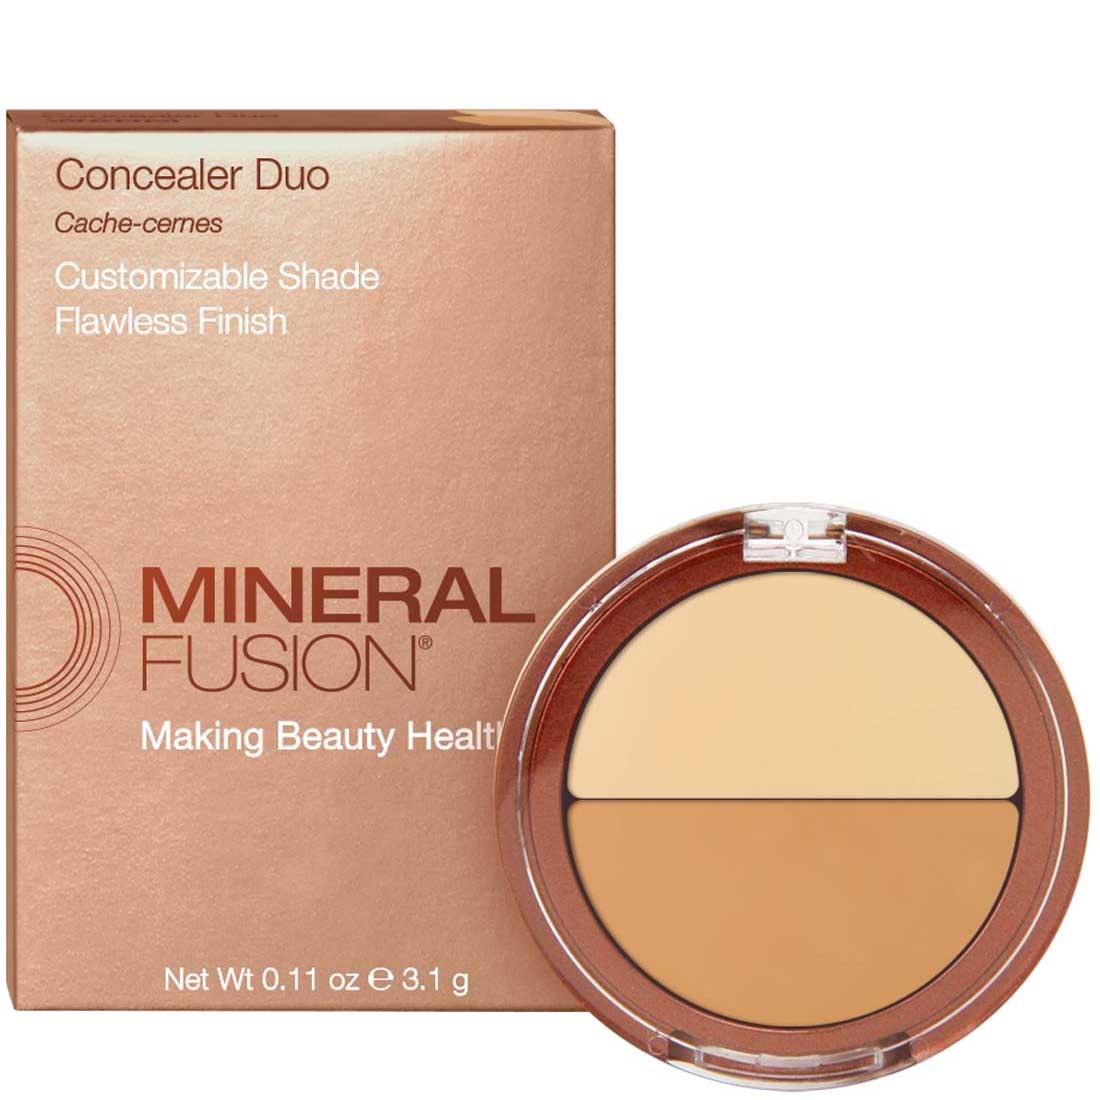 Mineral Fusion Concealer Duo, 3.1g, Clearance 35% Off, Final Sale